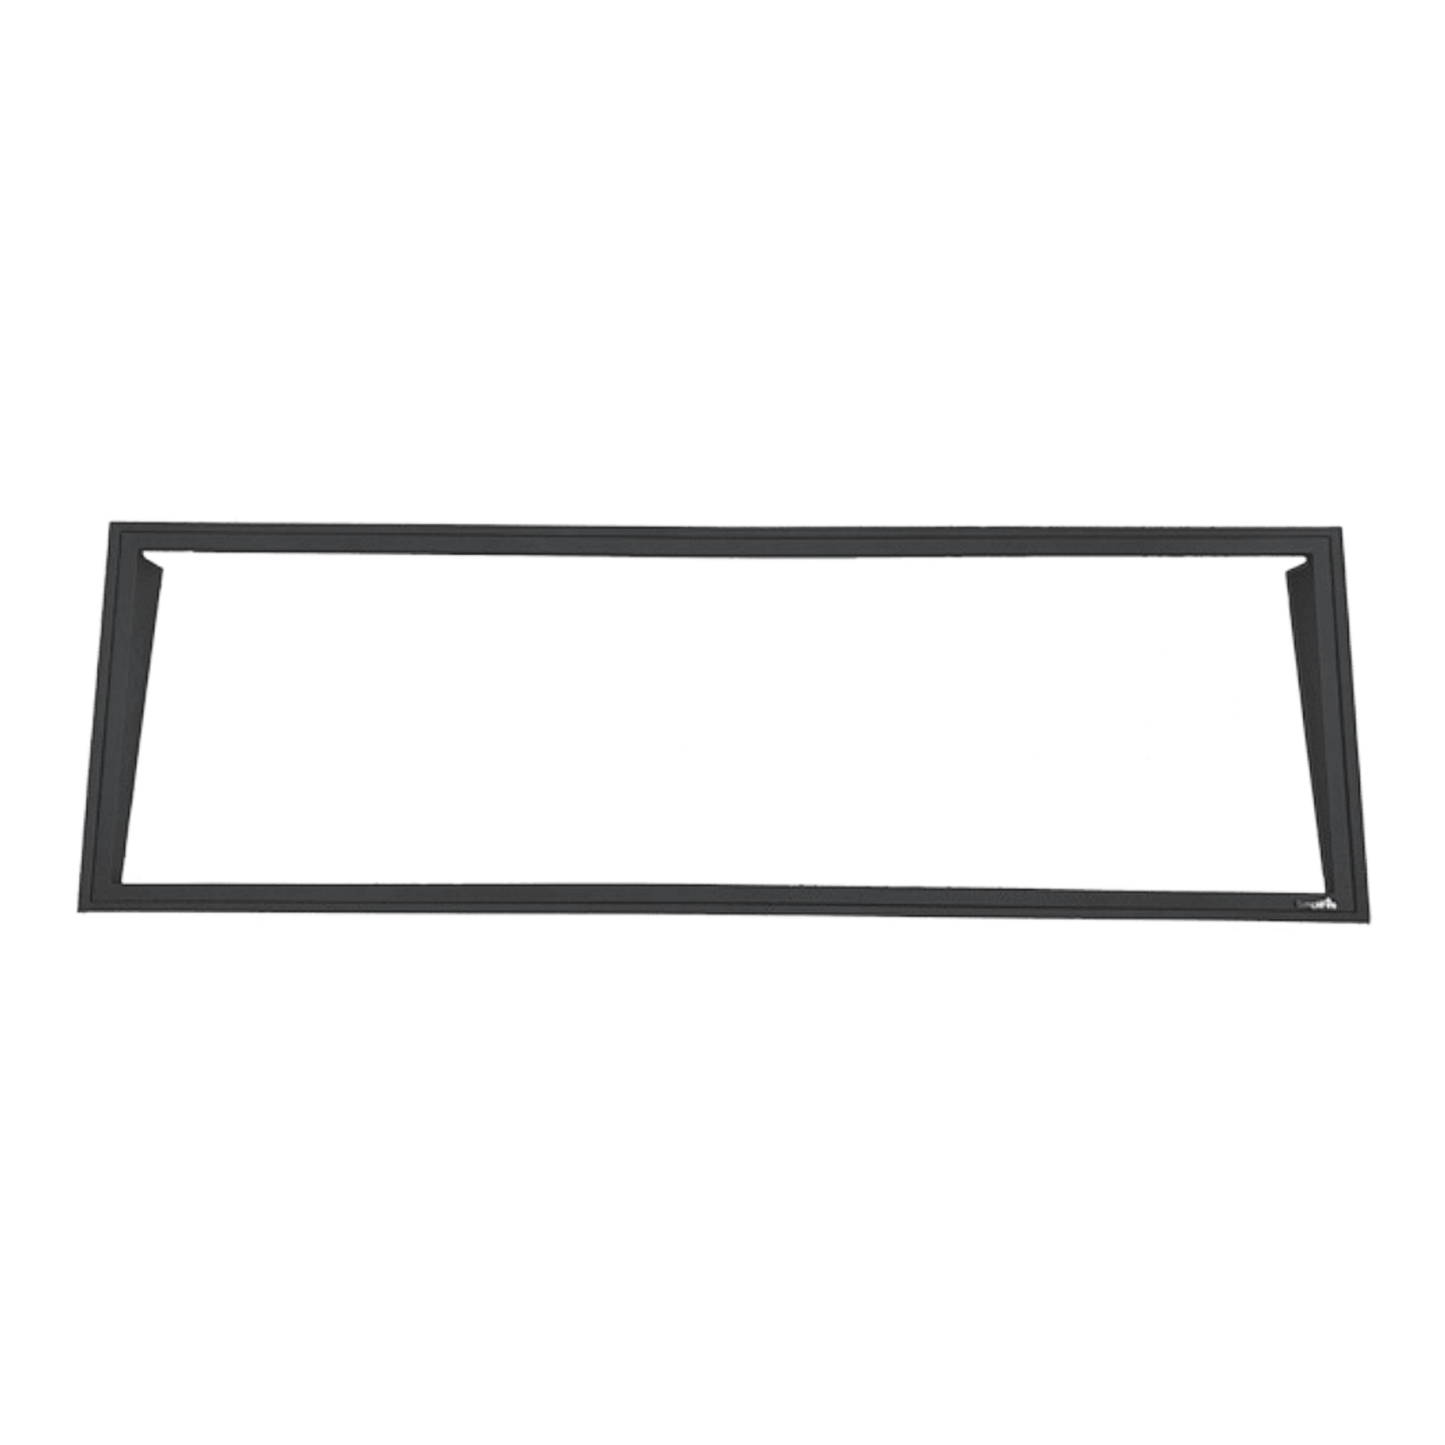 SimpliFire Standard Front for 55" Scion Fireplace